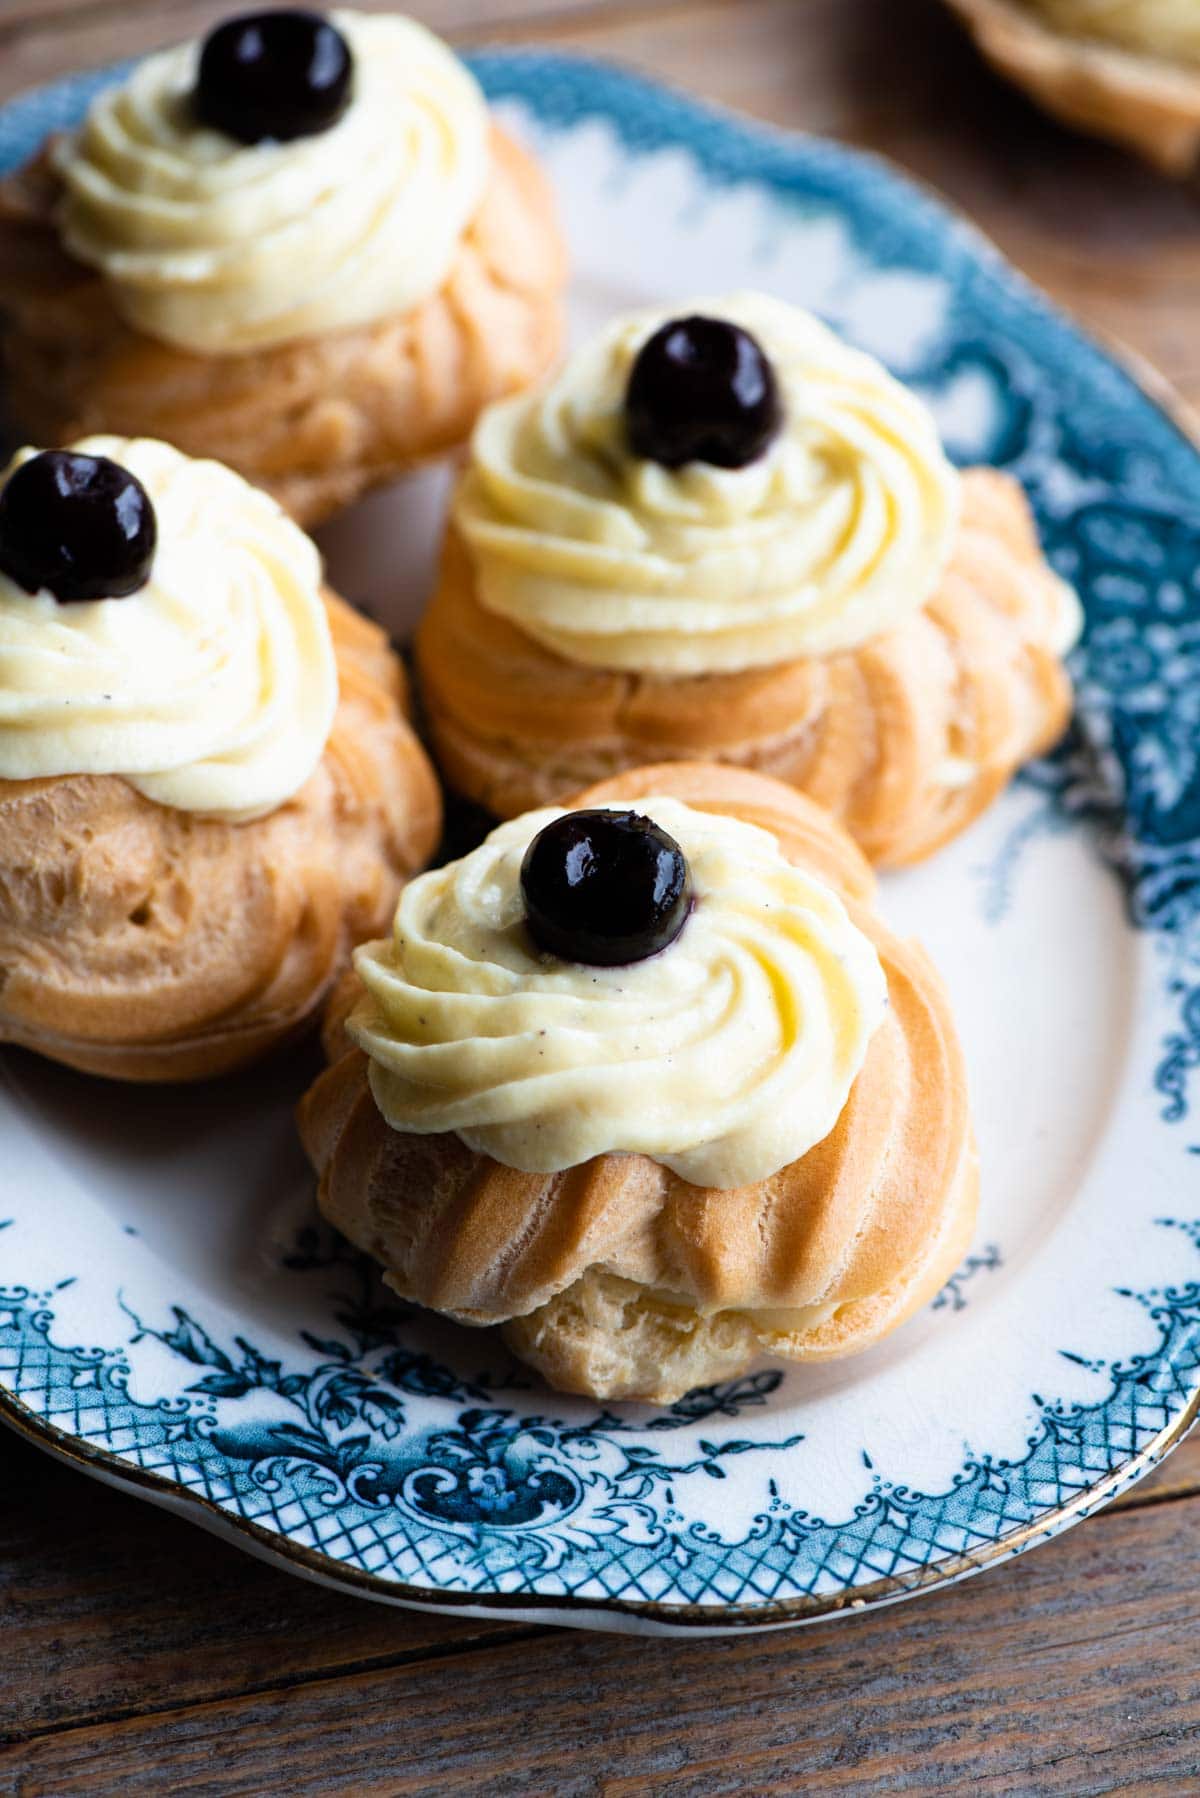 A close up of Italian Zeppole choux buns filled with pastry cream and a cherry on top sitting on a blue and white plate.